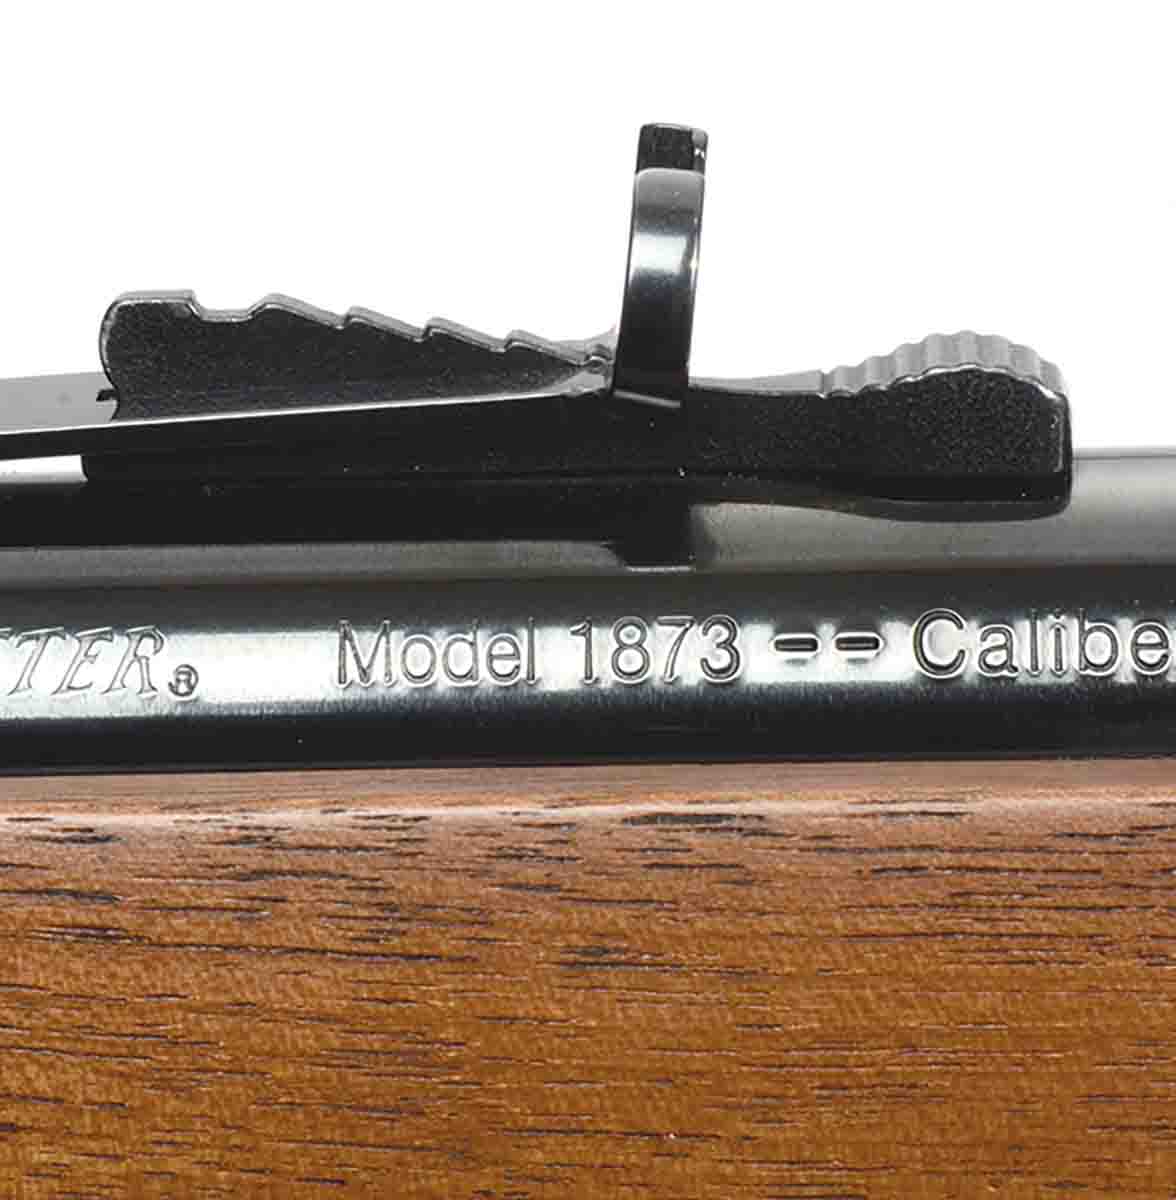 Its standard rear sight is a buckhorn with notched slider for elevation adjustment.